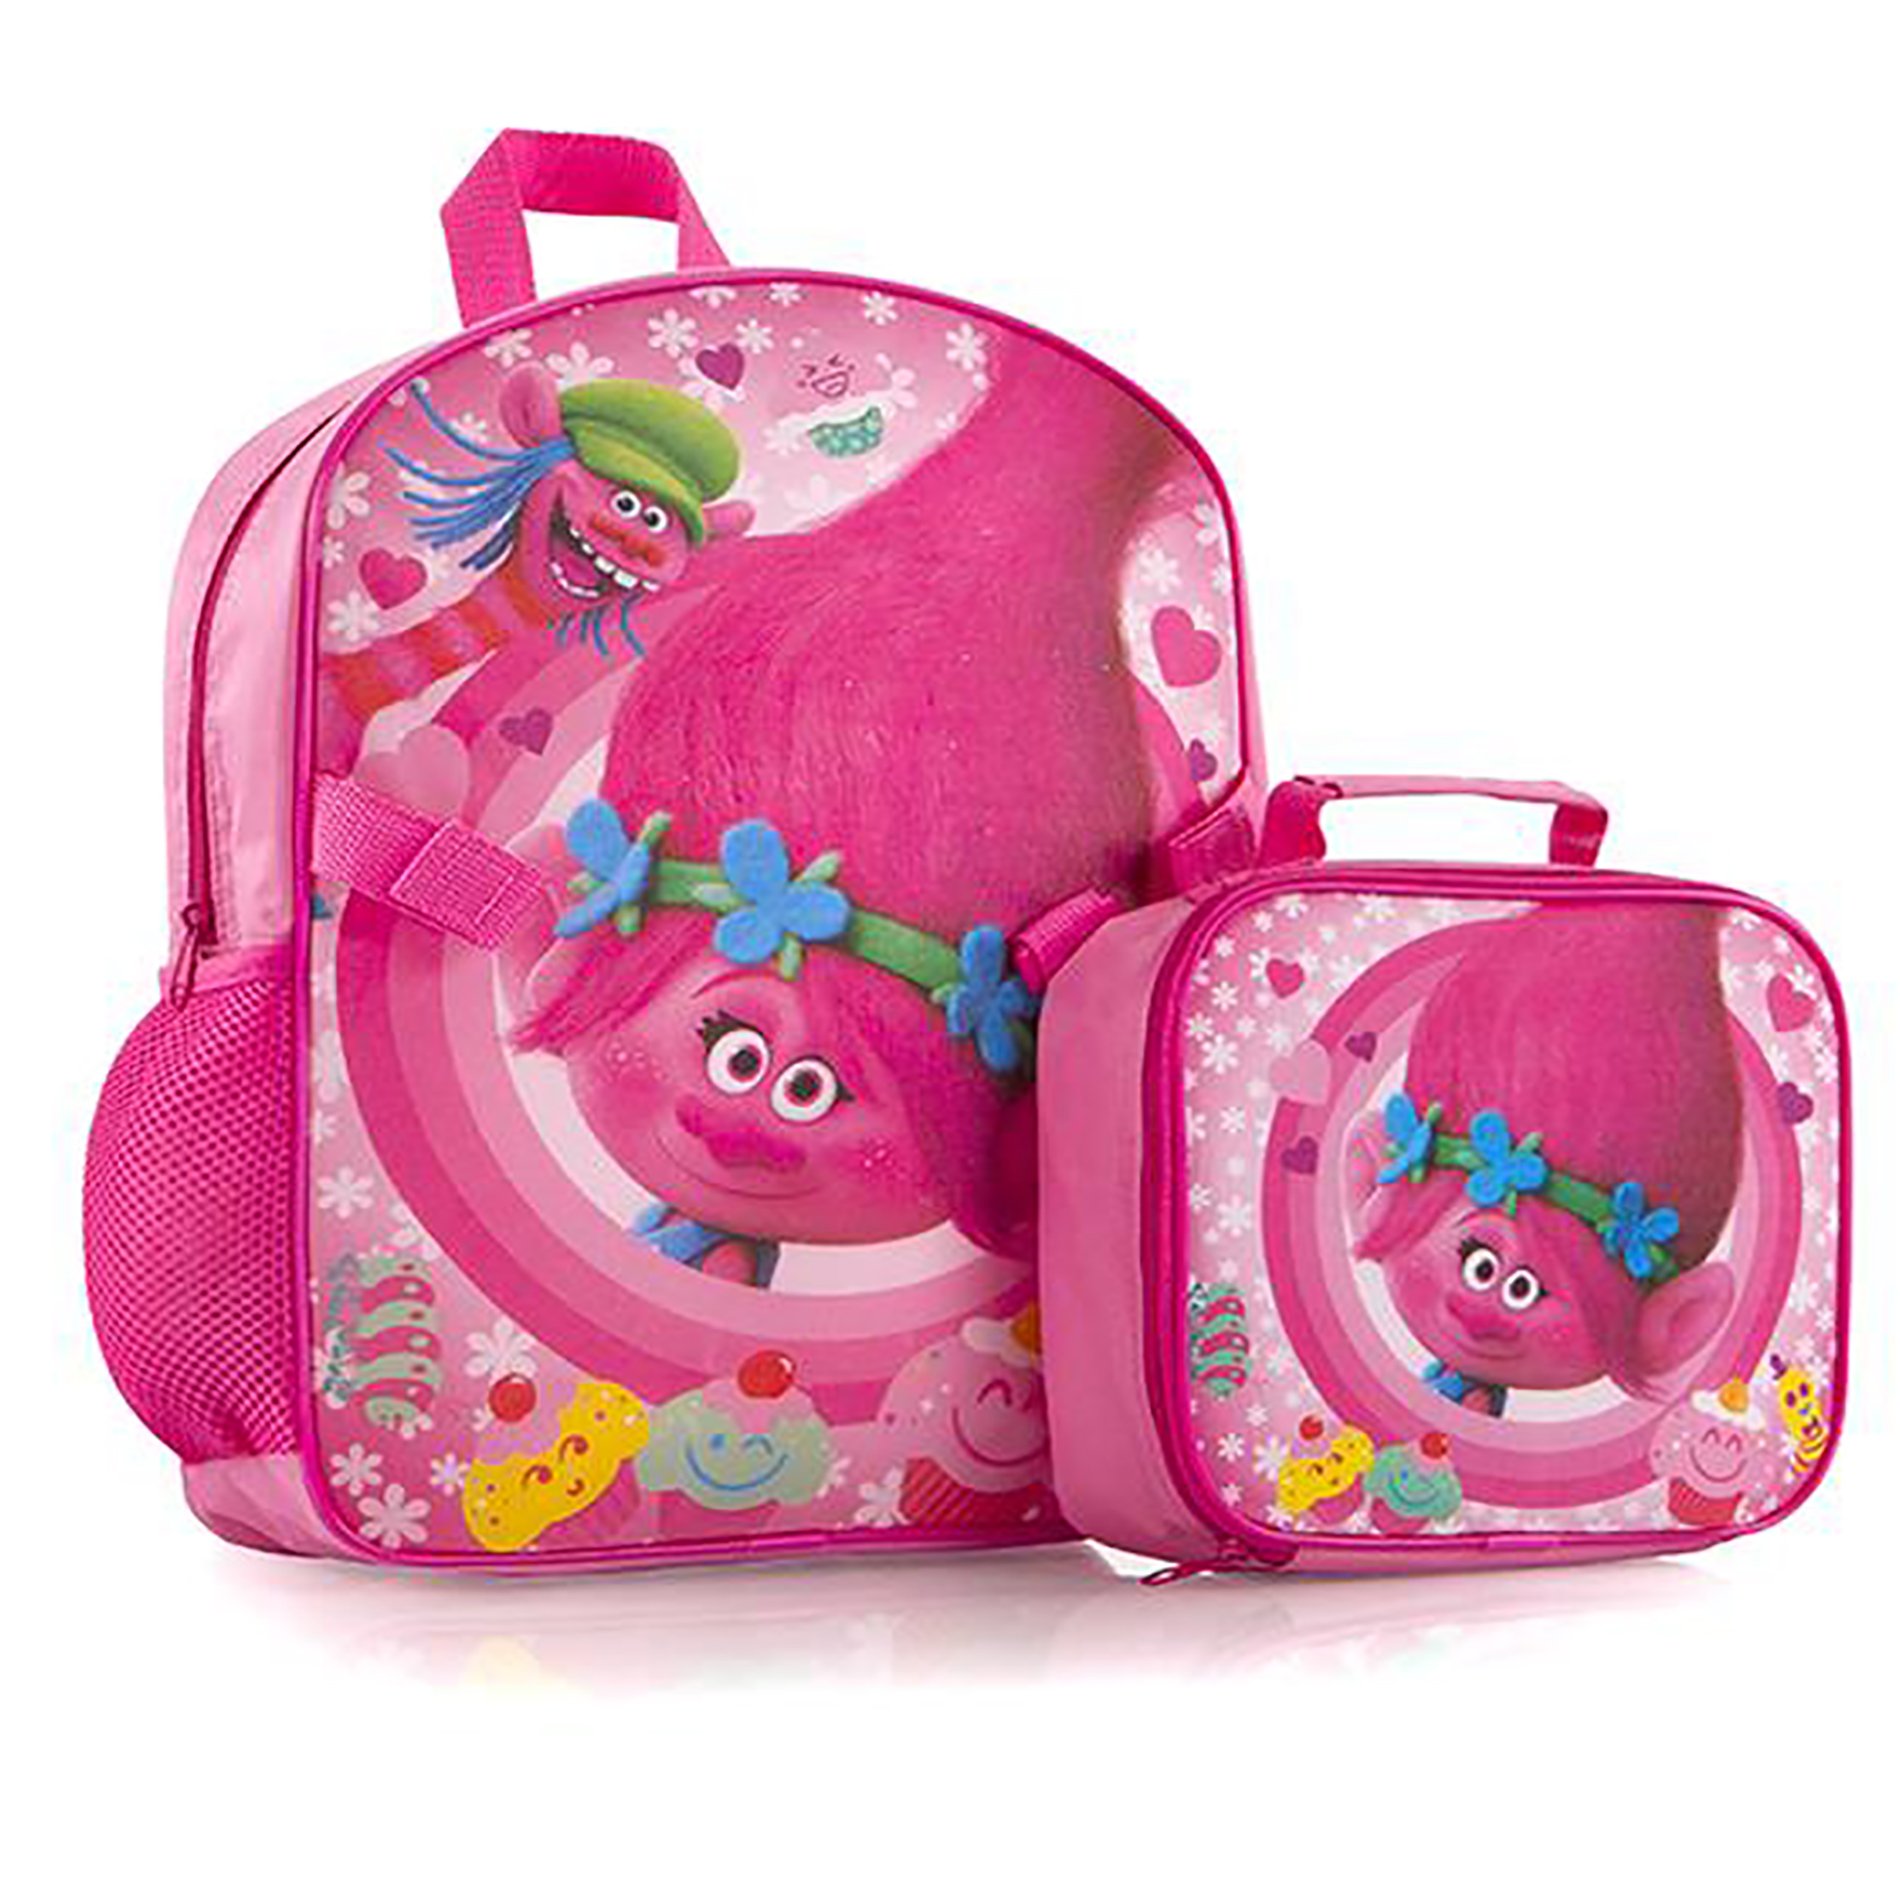 Trolls Deluxe Backpack and Lunch Bag Set